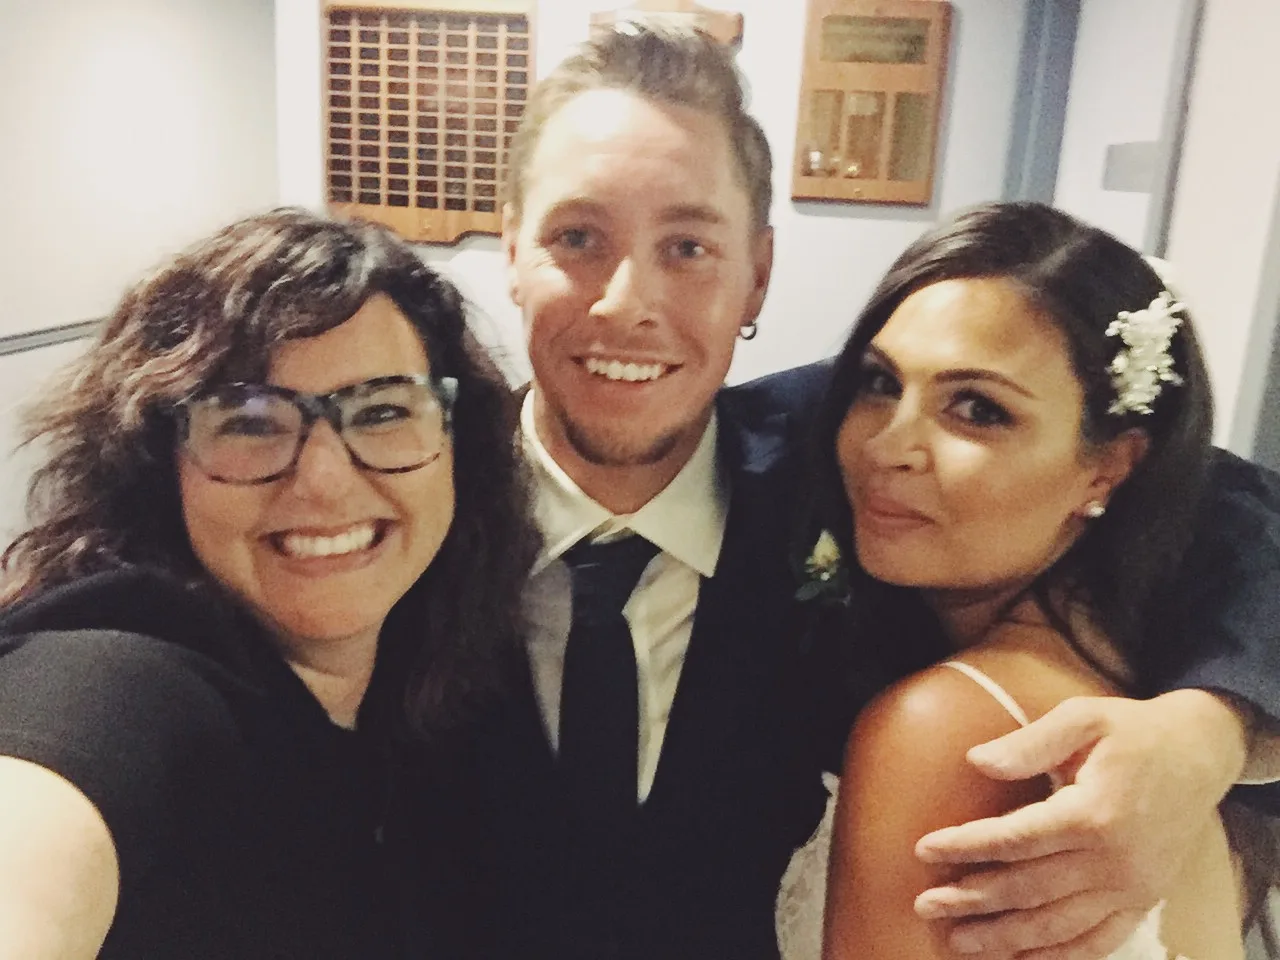 Selfie of Jordanna and Justin with officiant lani